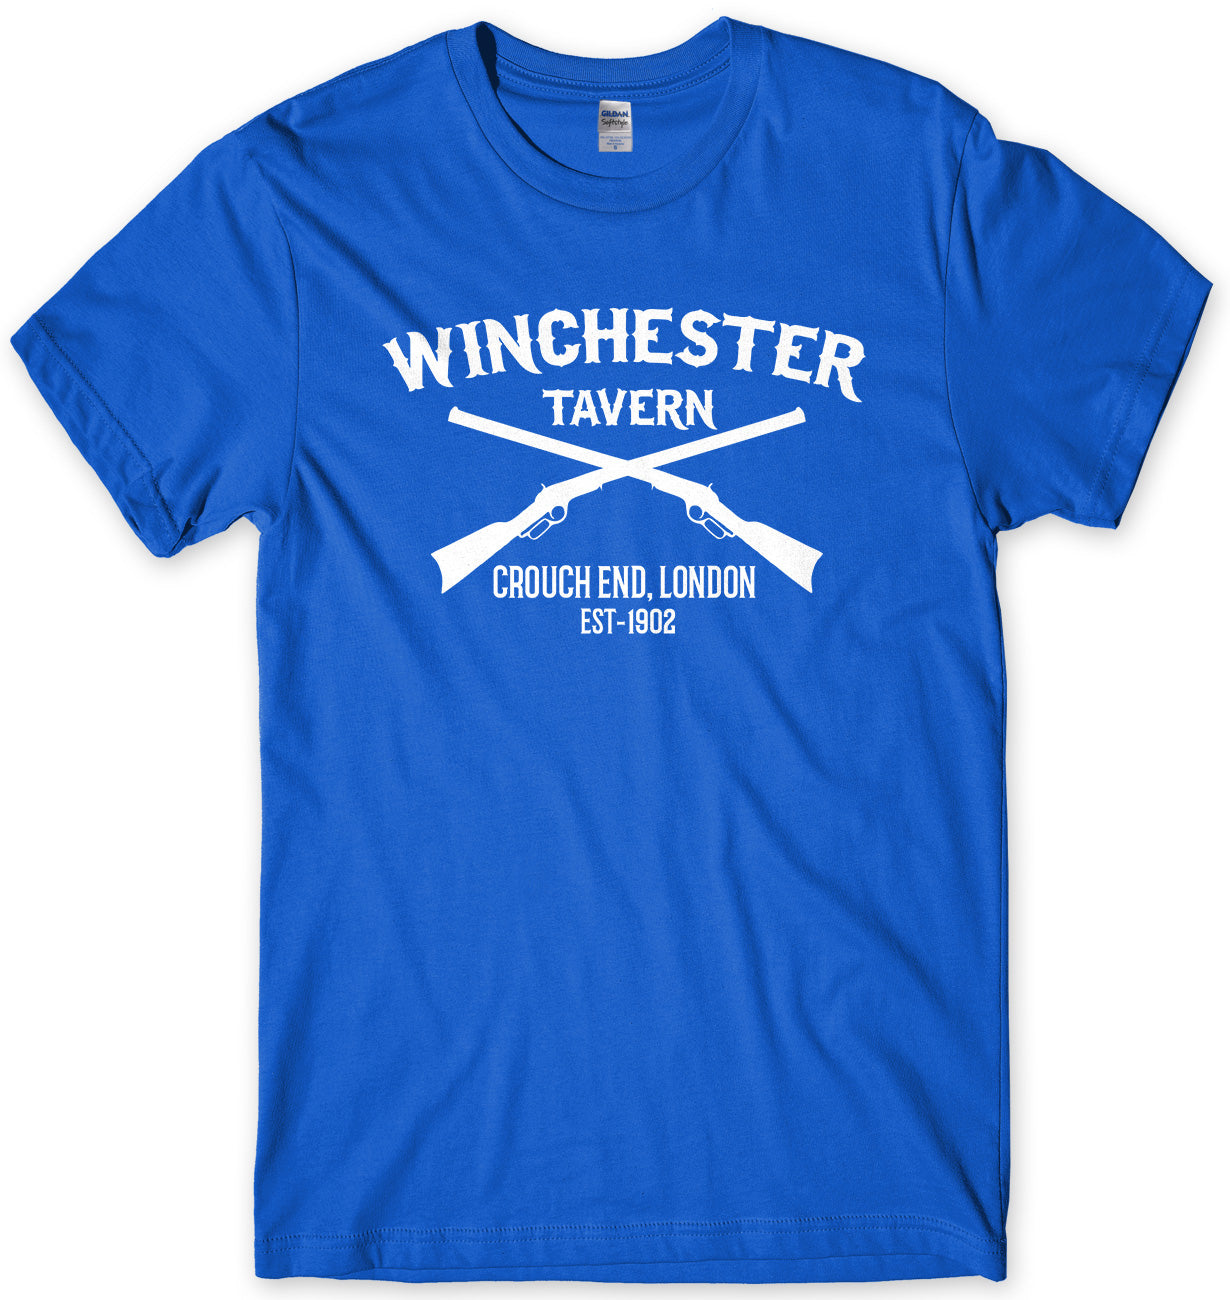 WINCHESTER TAVERN - INSPIRED BY SHAUN OF THE DEAD MENS UNISEX T-SHIRT